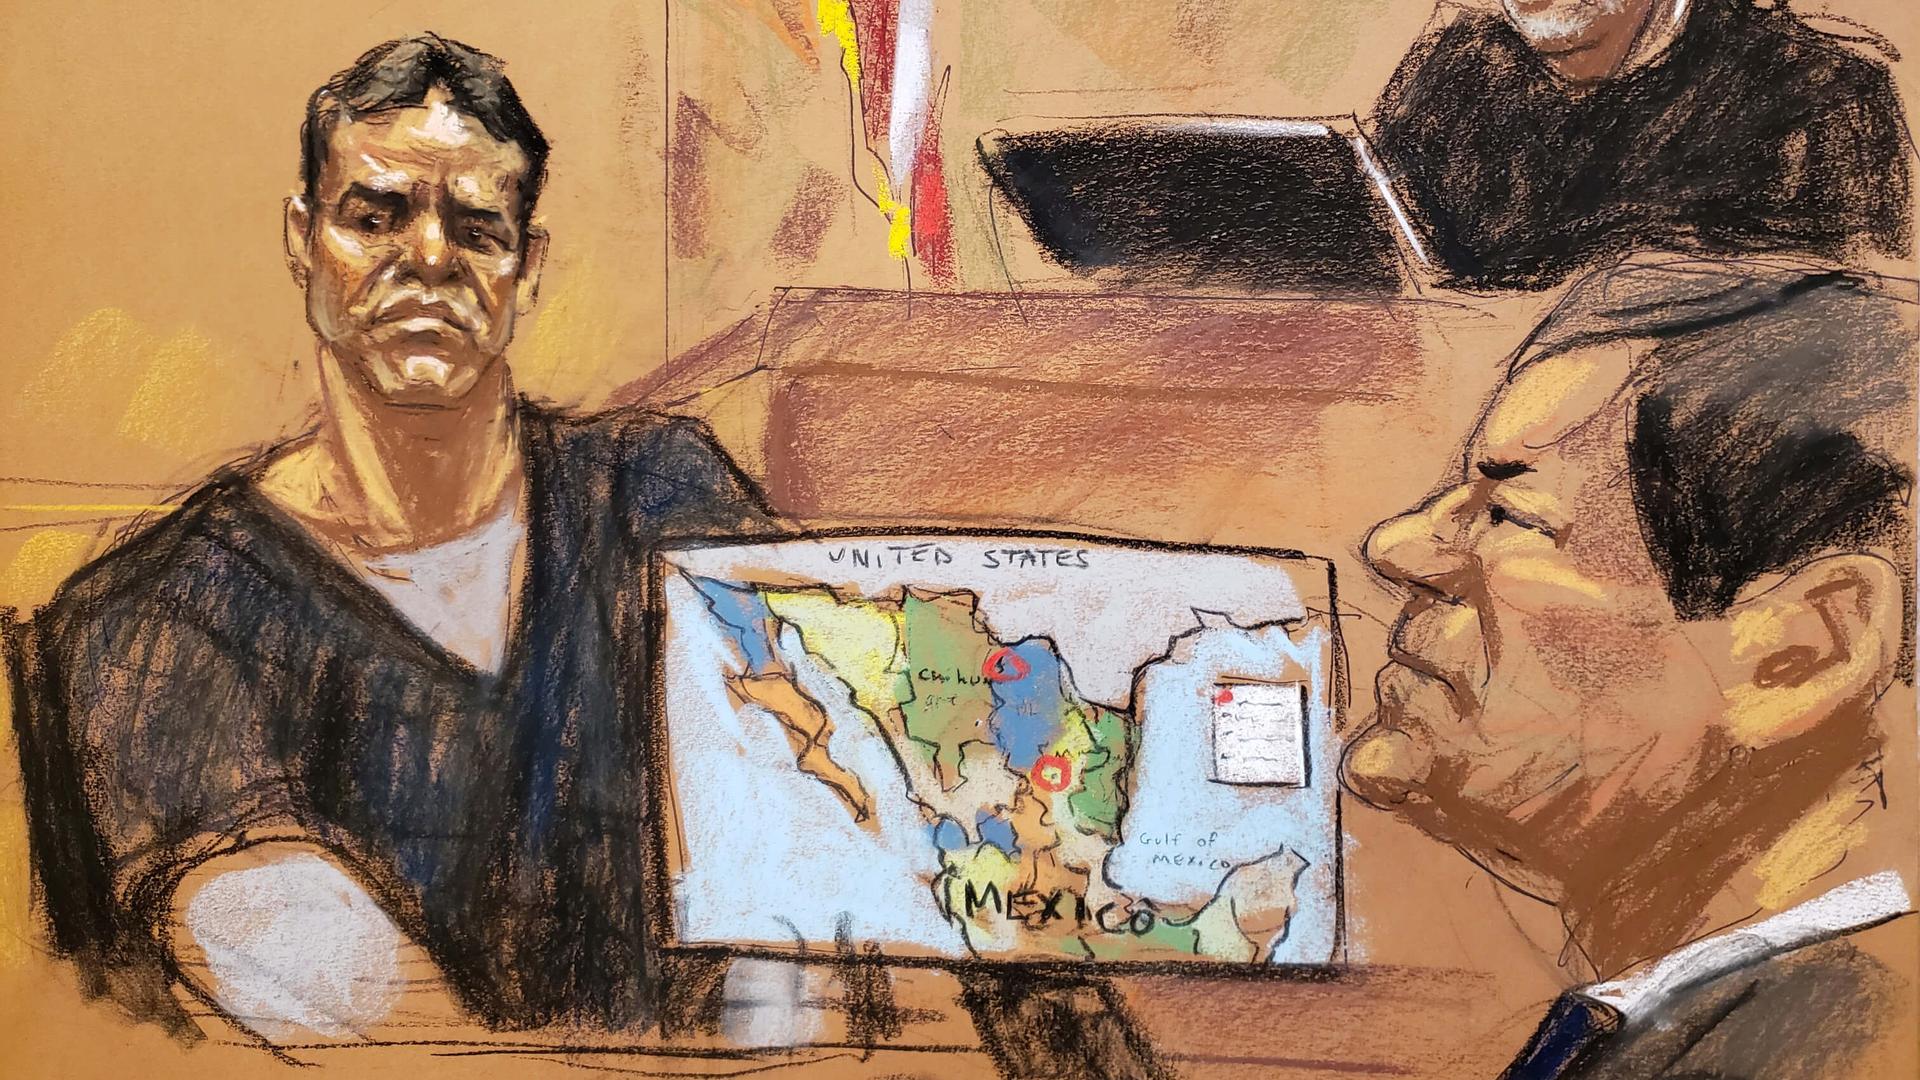 Vicente Zambada Niebla takes the witness box, at the trial of accused Mexican drug lord Joaquin "El Chapo" Guzman, right, in this courtroom sketch 